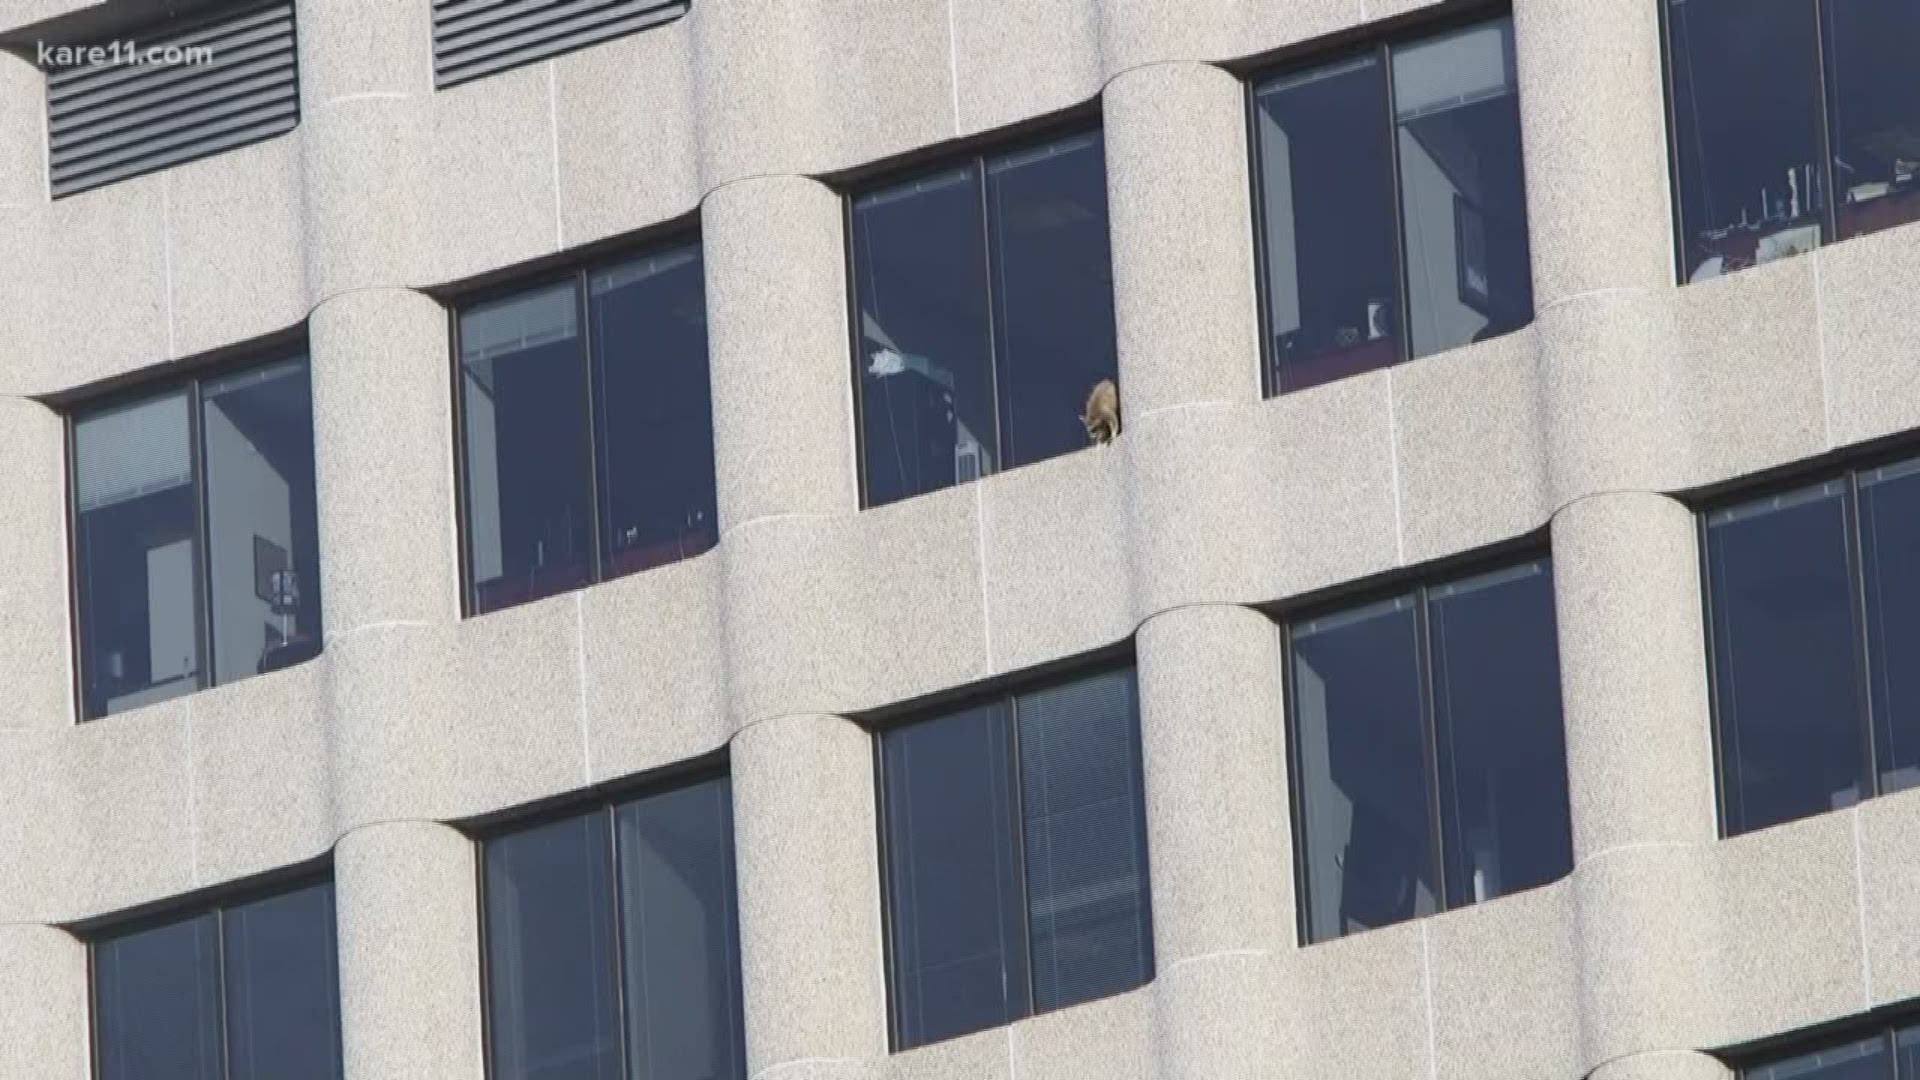 How can you root against a small, furry creature? #MPRraccoon https://kare11.tv/2y5kLot